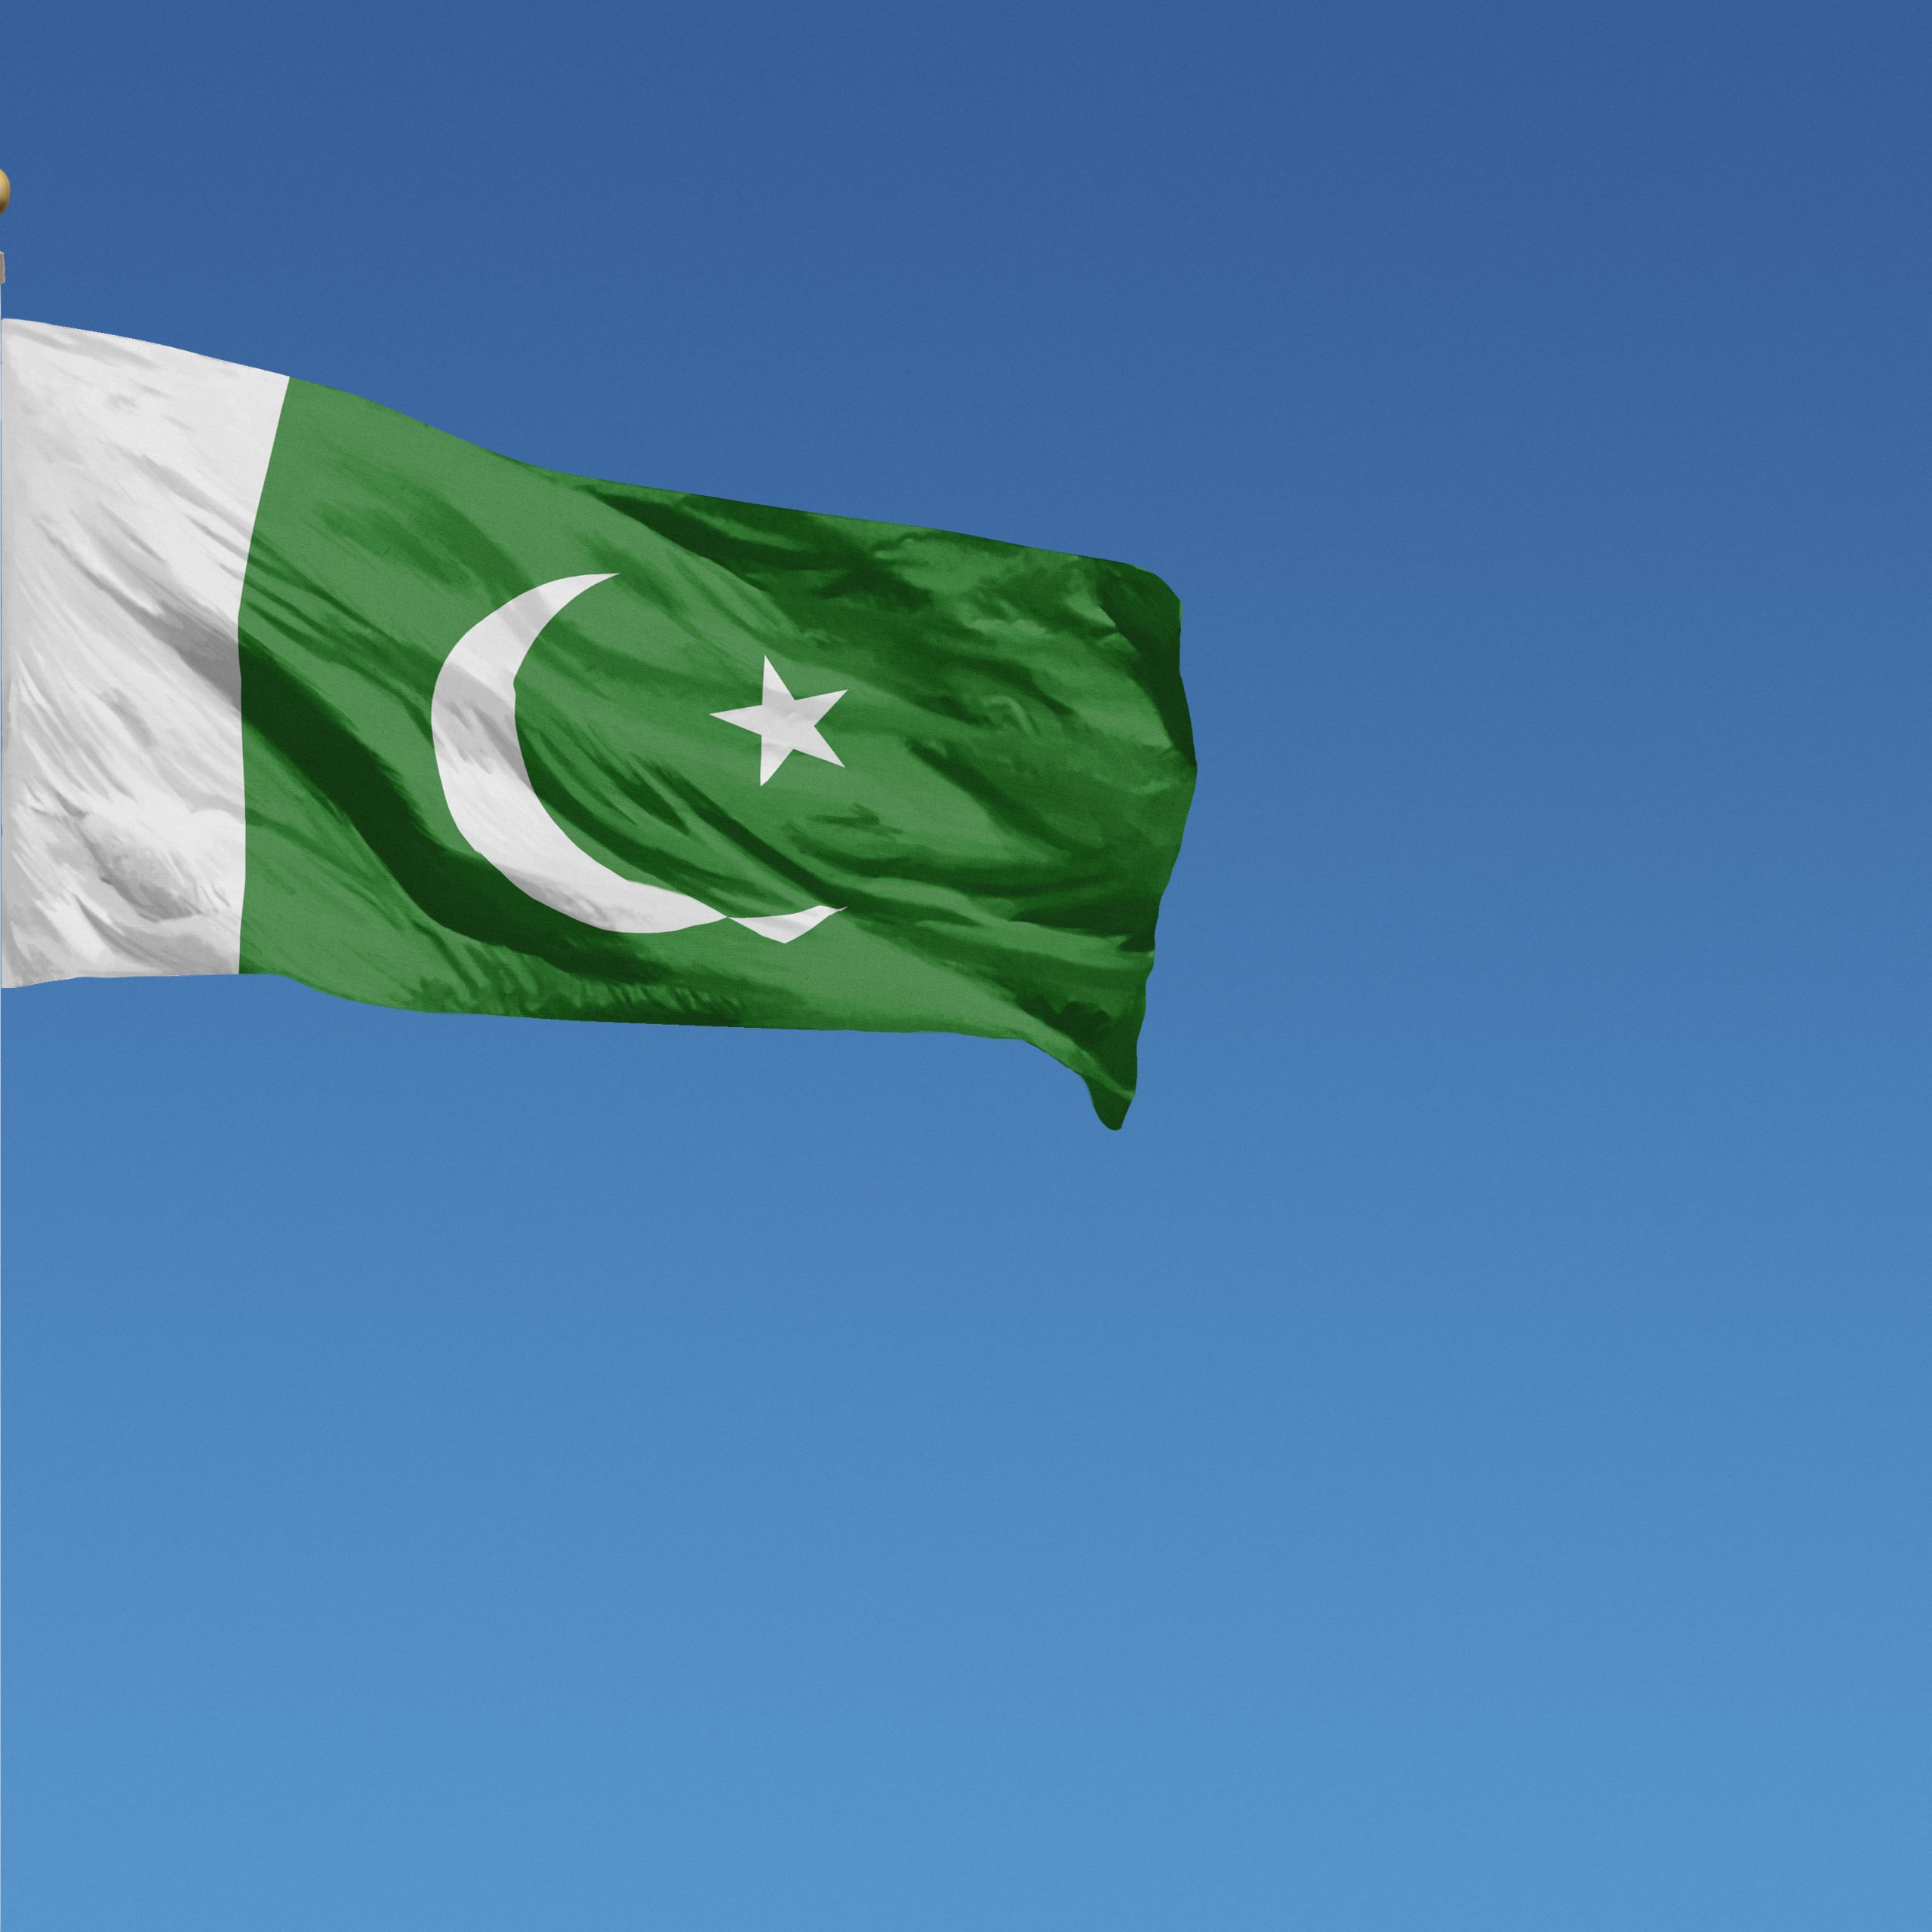 Flag of Pakistan in front of a clear blue sky